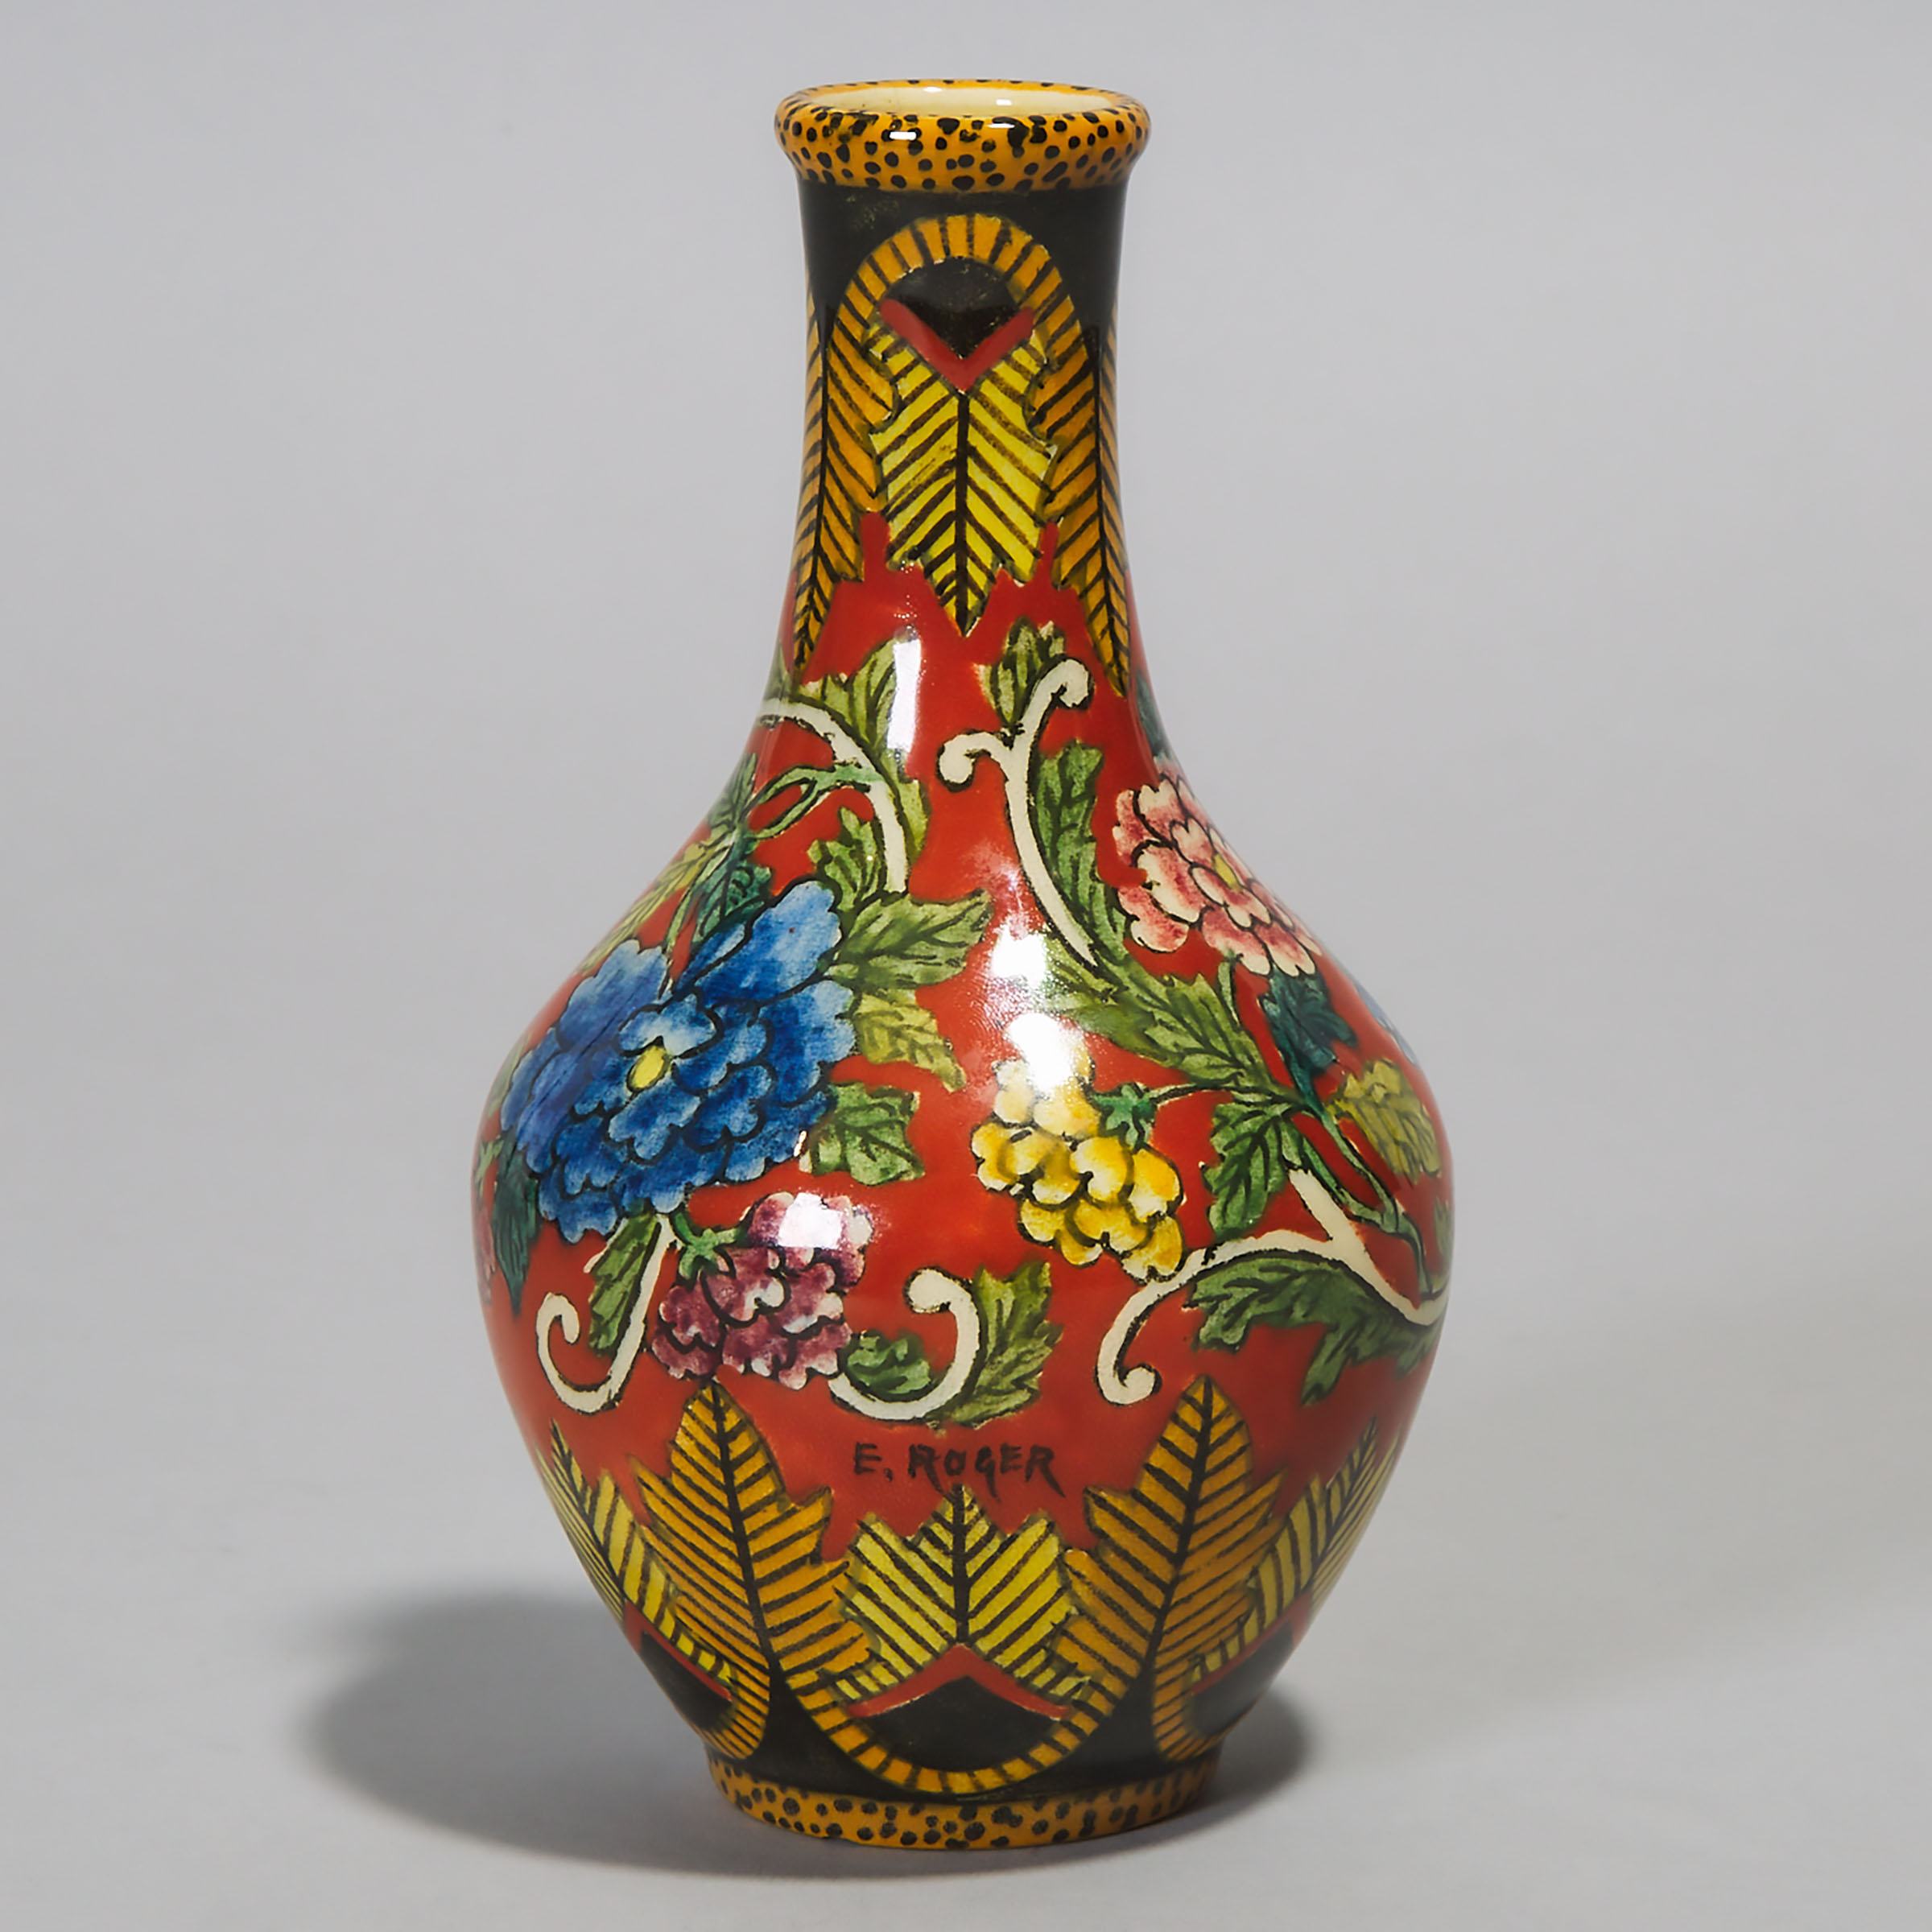 Milet Sèvres Small Vase, early 20th century